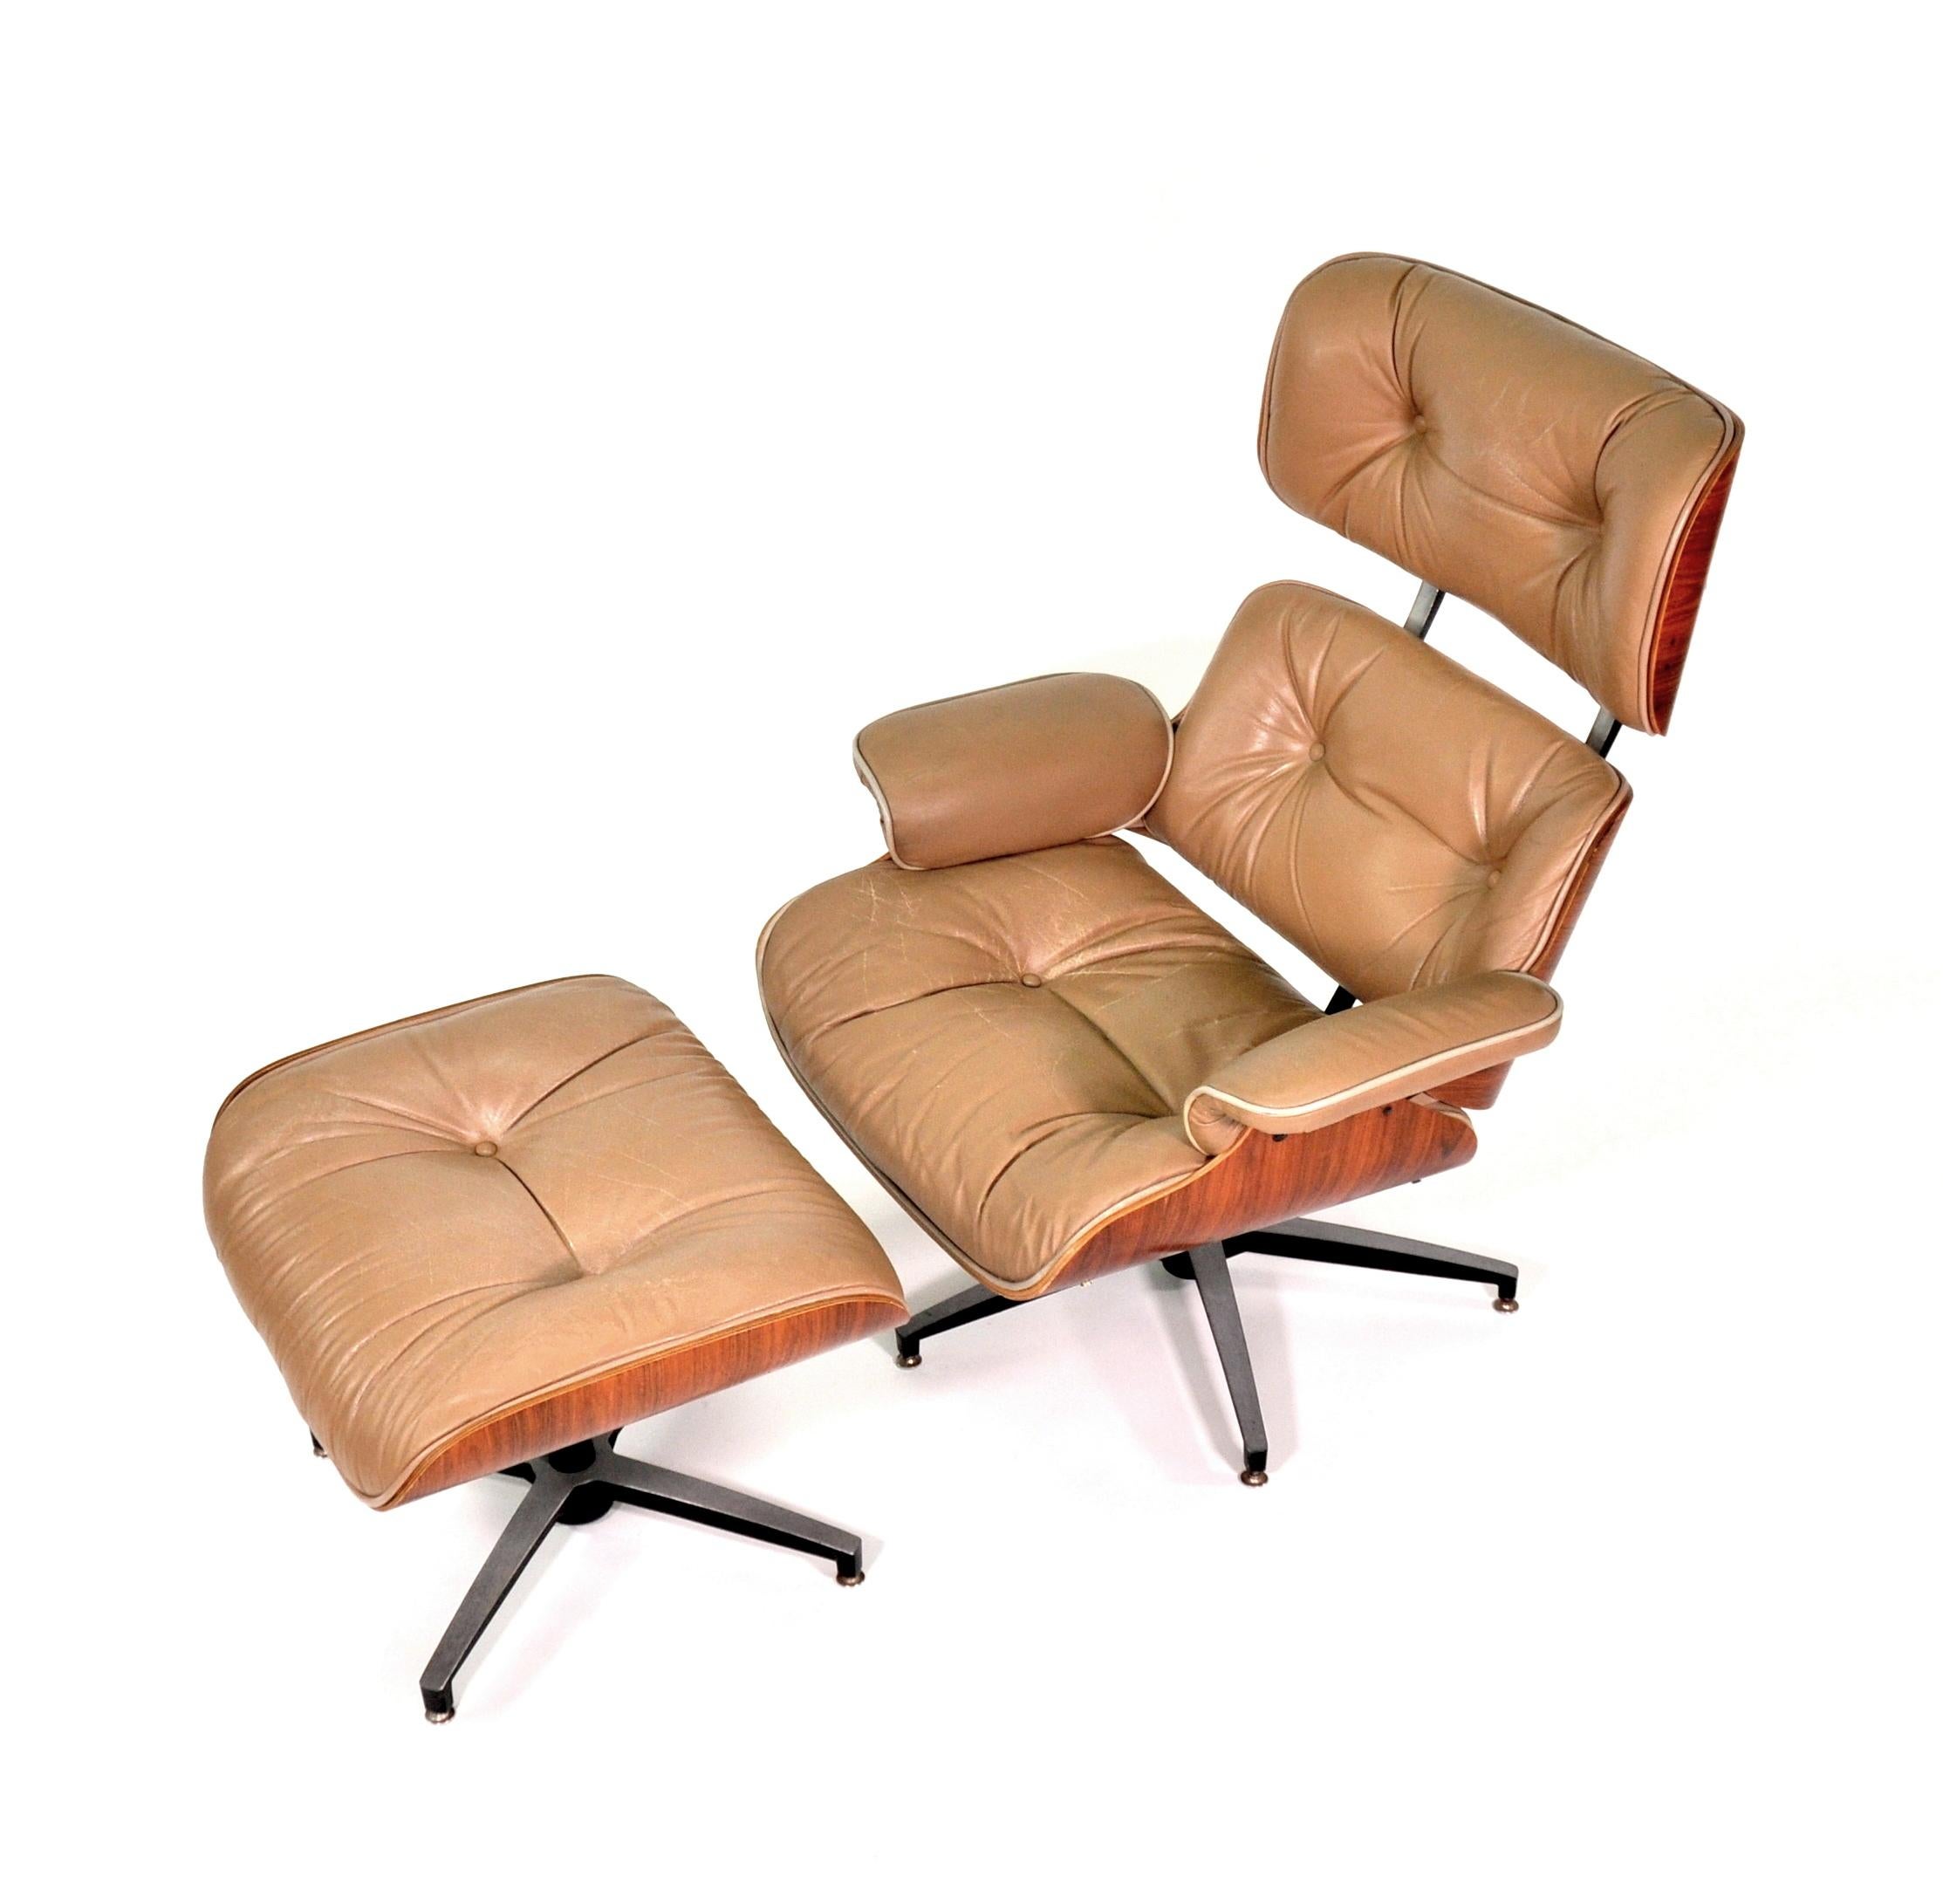 Walnut Midcentury Eames Style Leather Lounge Chair and Ottoman